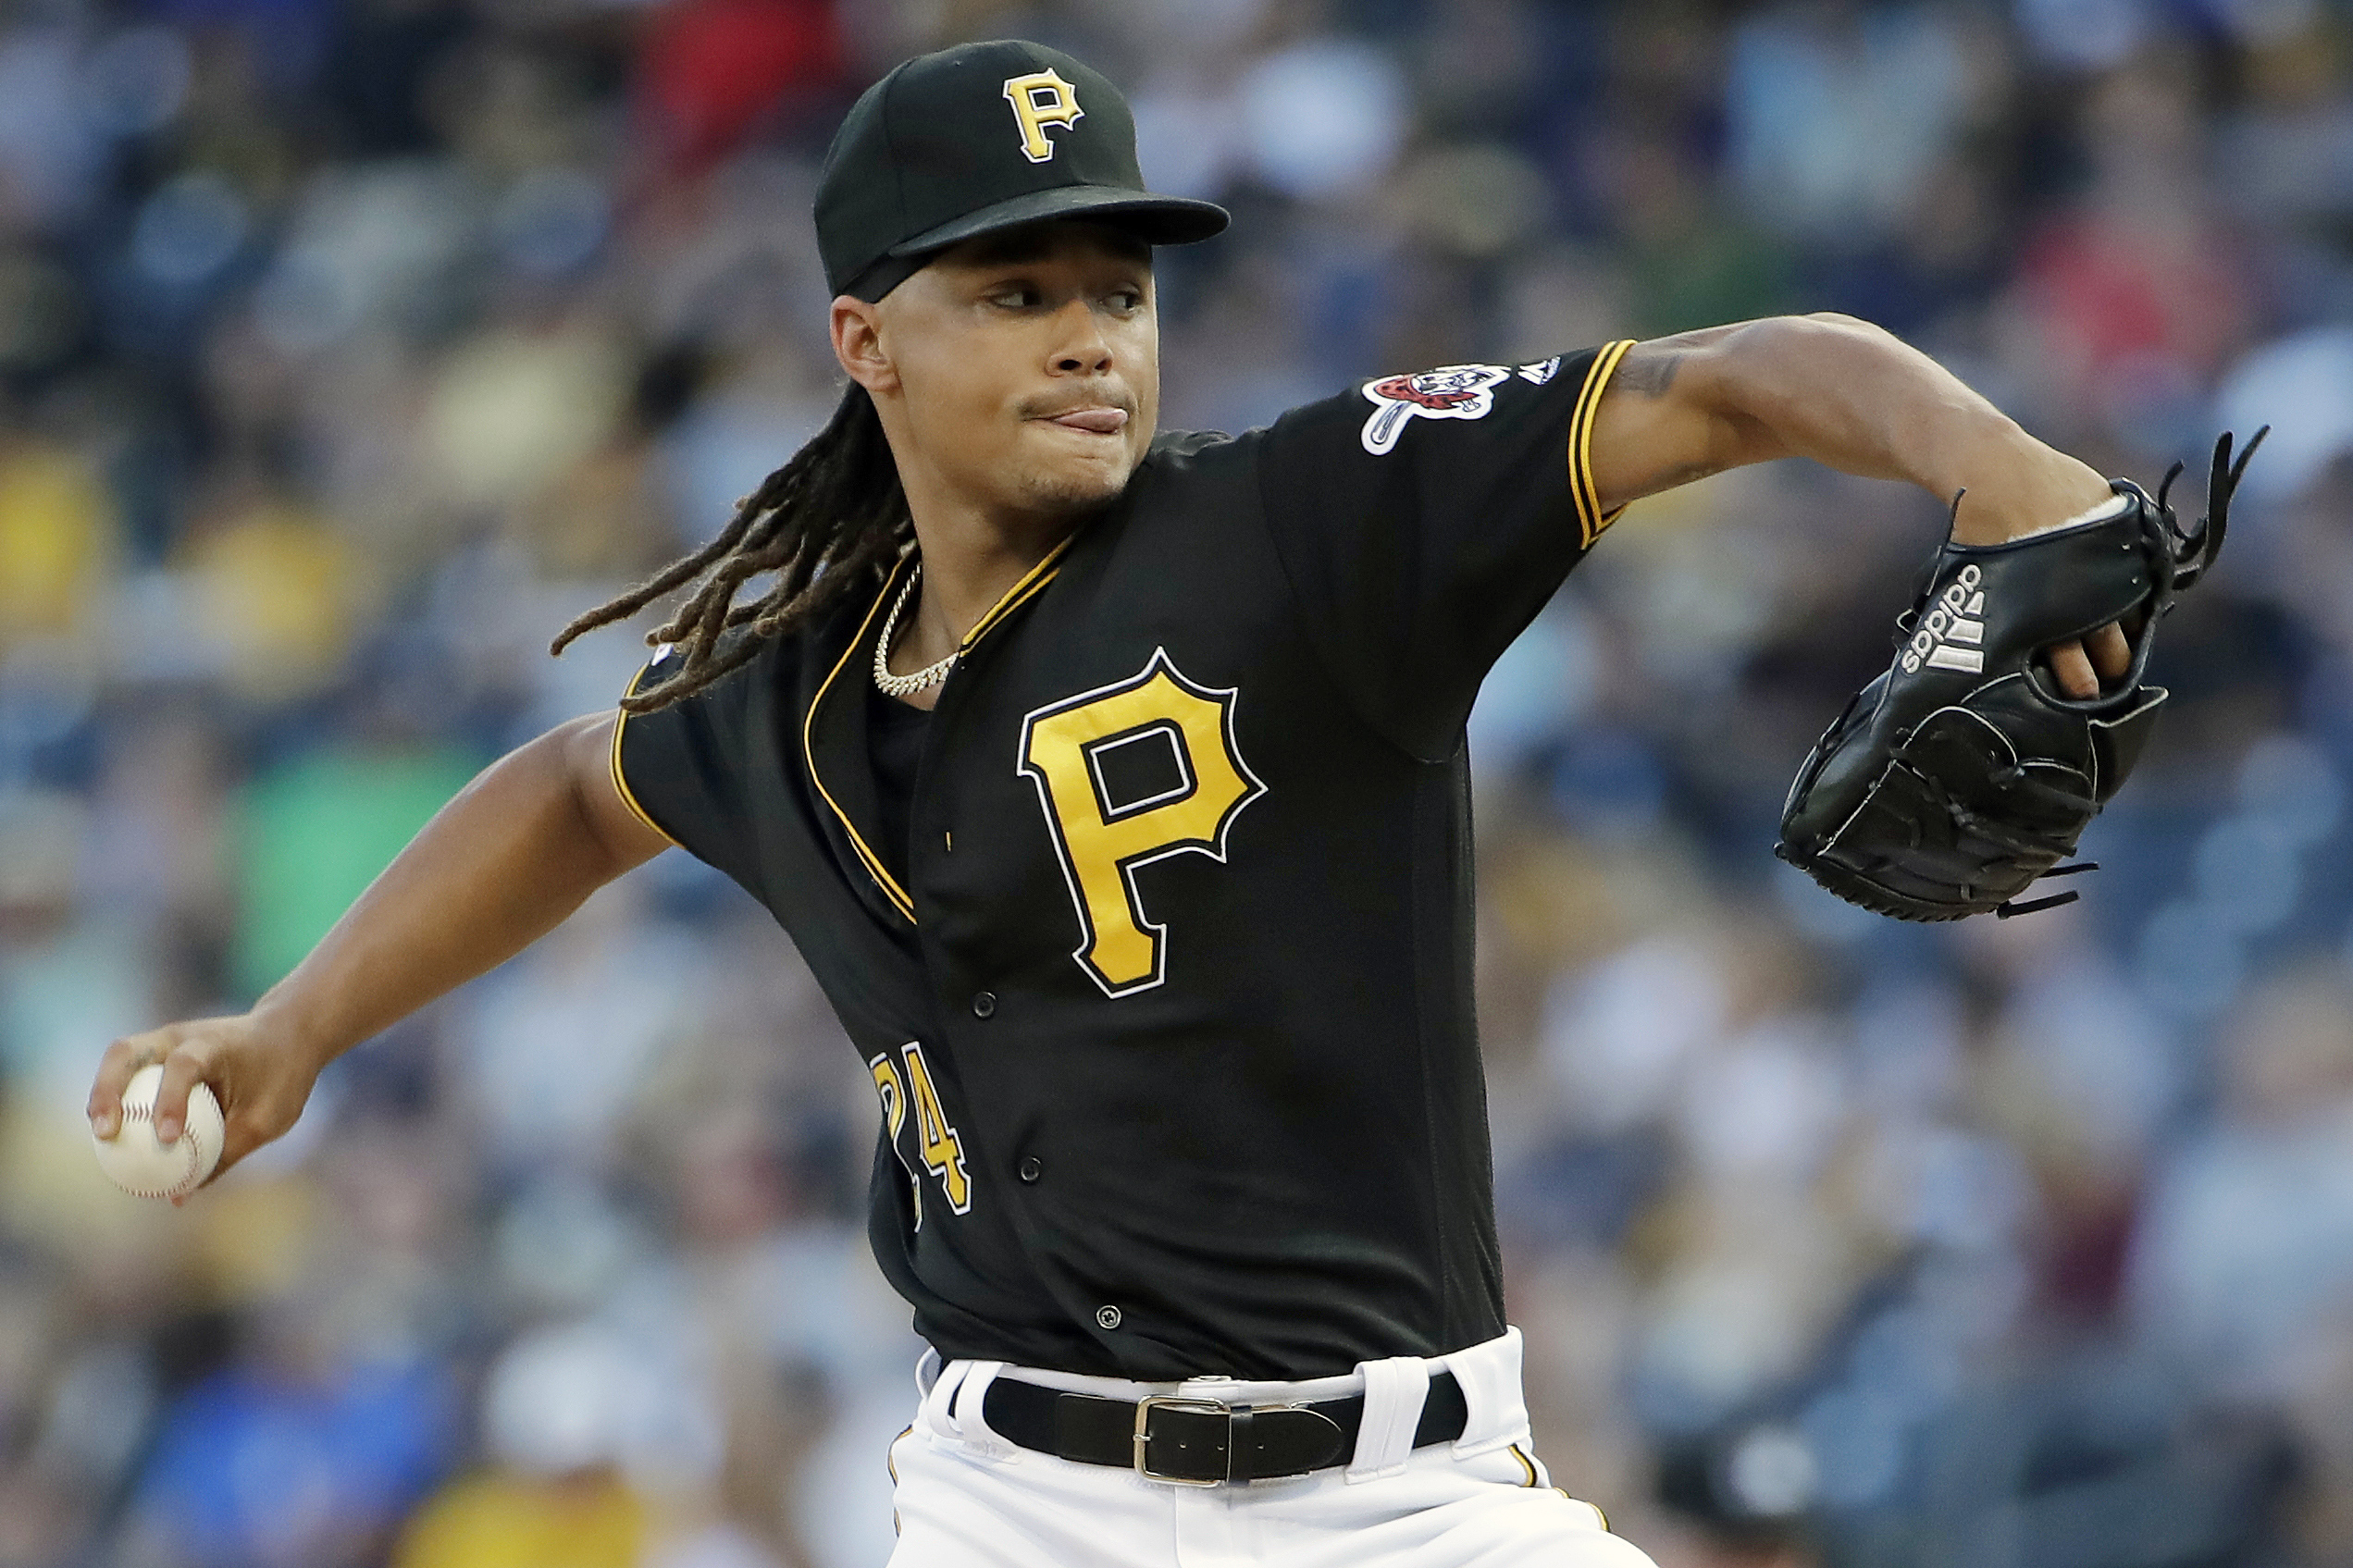 Disastrous Chris Archer trade completes the cycle for Pittsburgh Pirates as RHP re-visitations of Tampa Bay